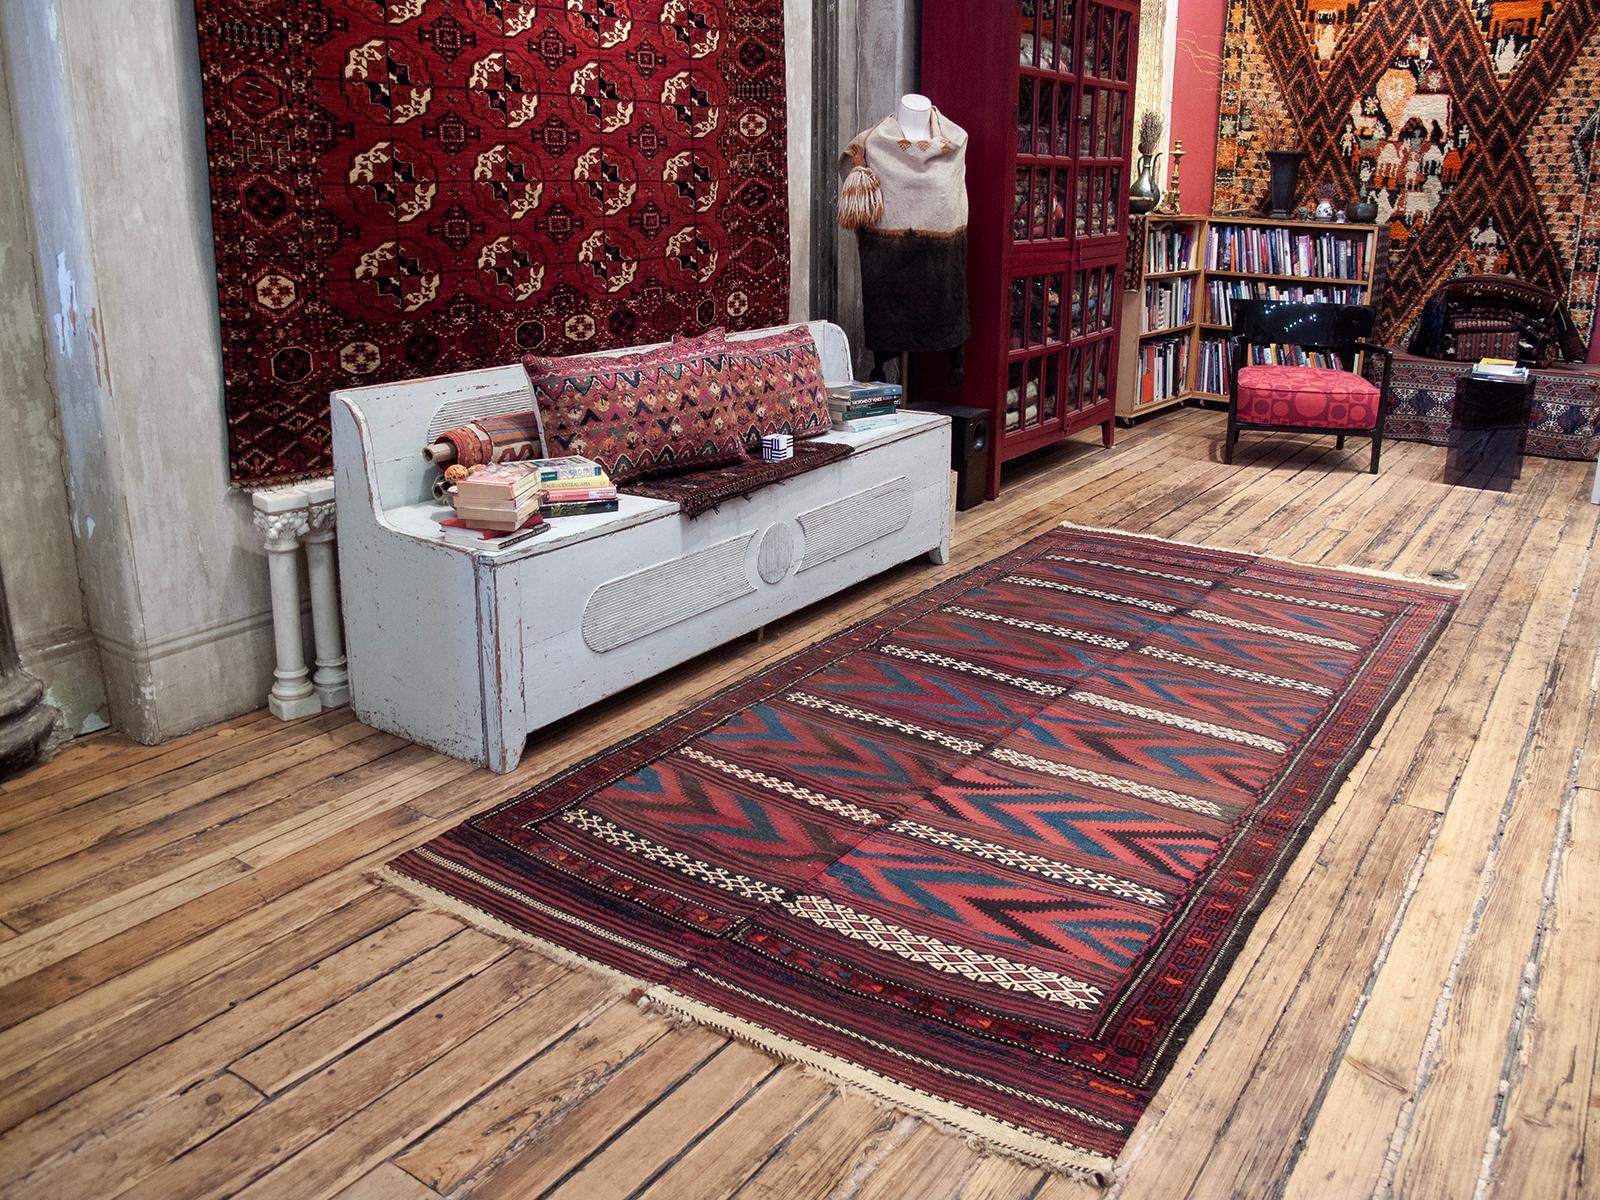 An old kilim, attributed to one of the Baluch tribal groups living along the western borders of Afghanistan who are all prolific weavers.

Woven in two halves on a simple nomadic loom, this kilim displays the characteristic color palette, design and